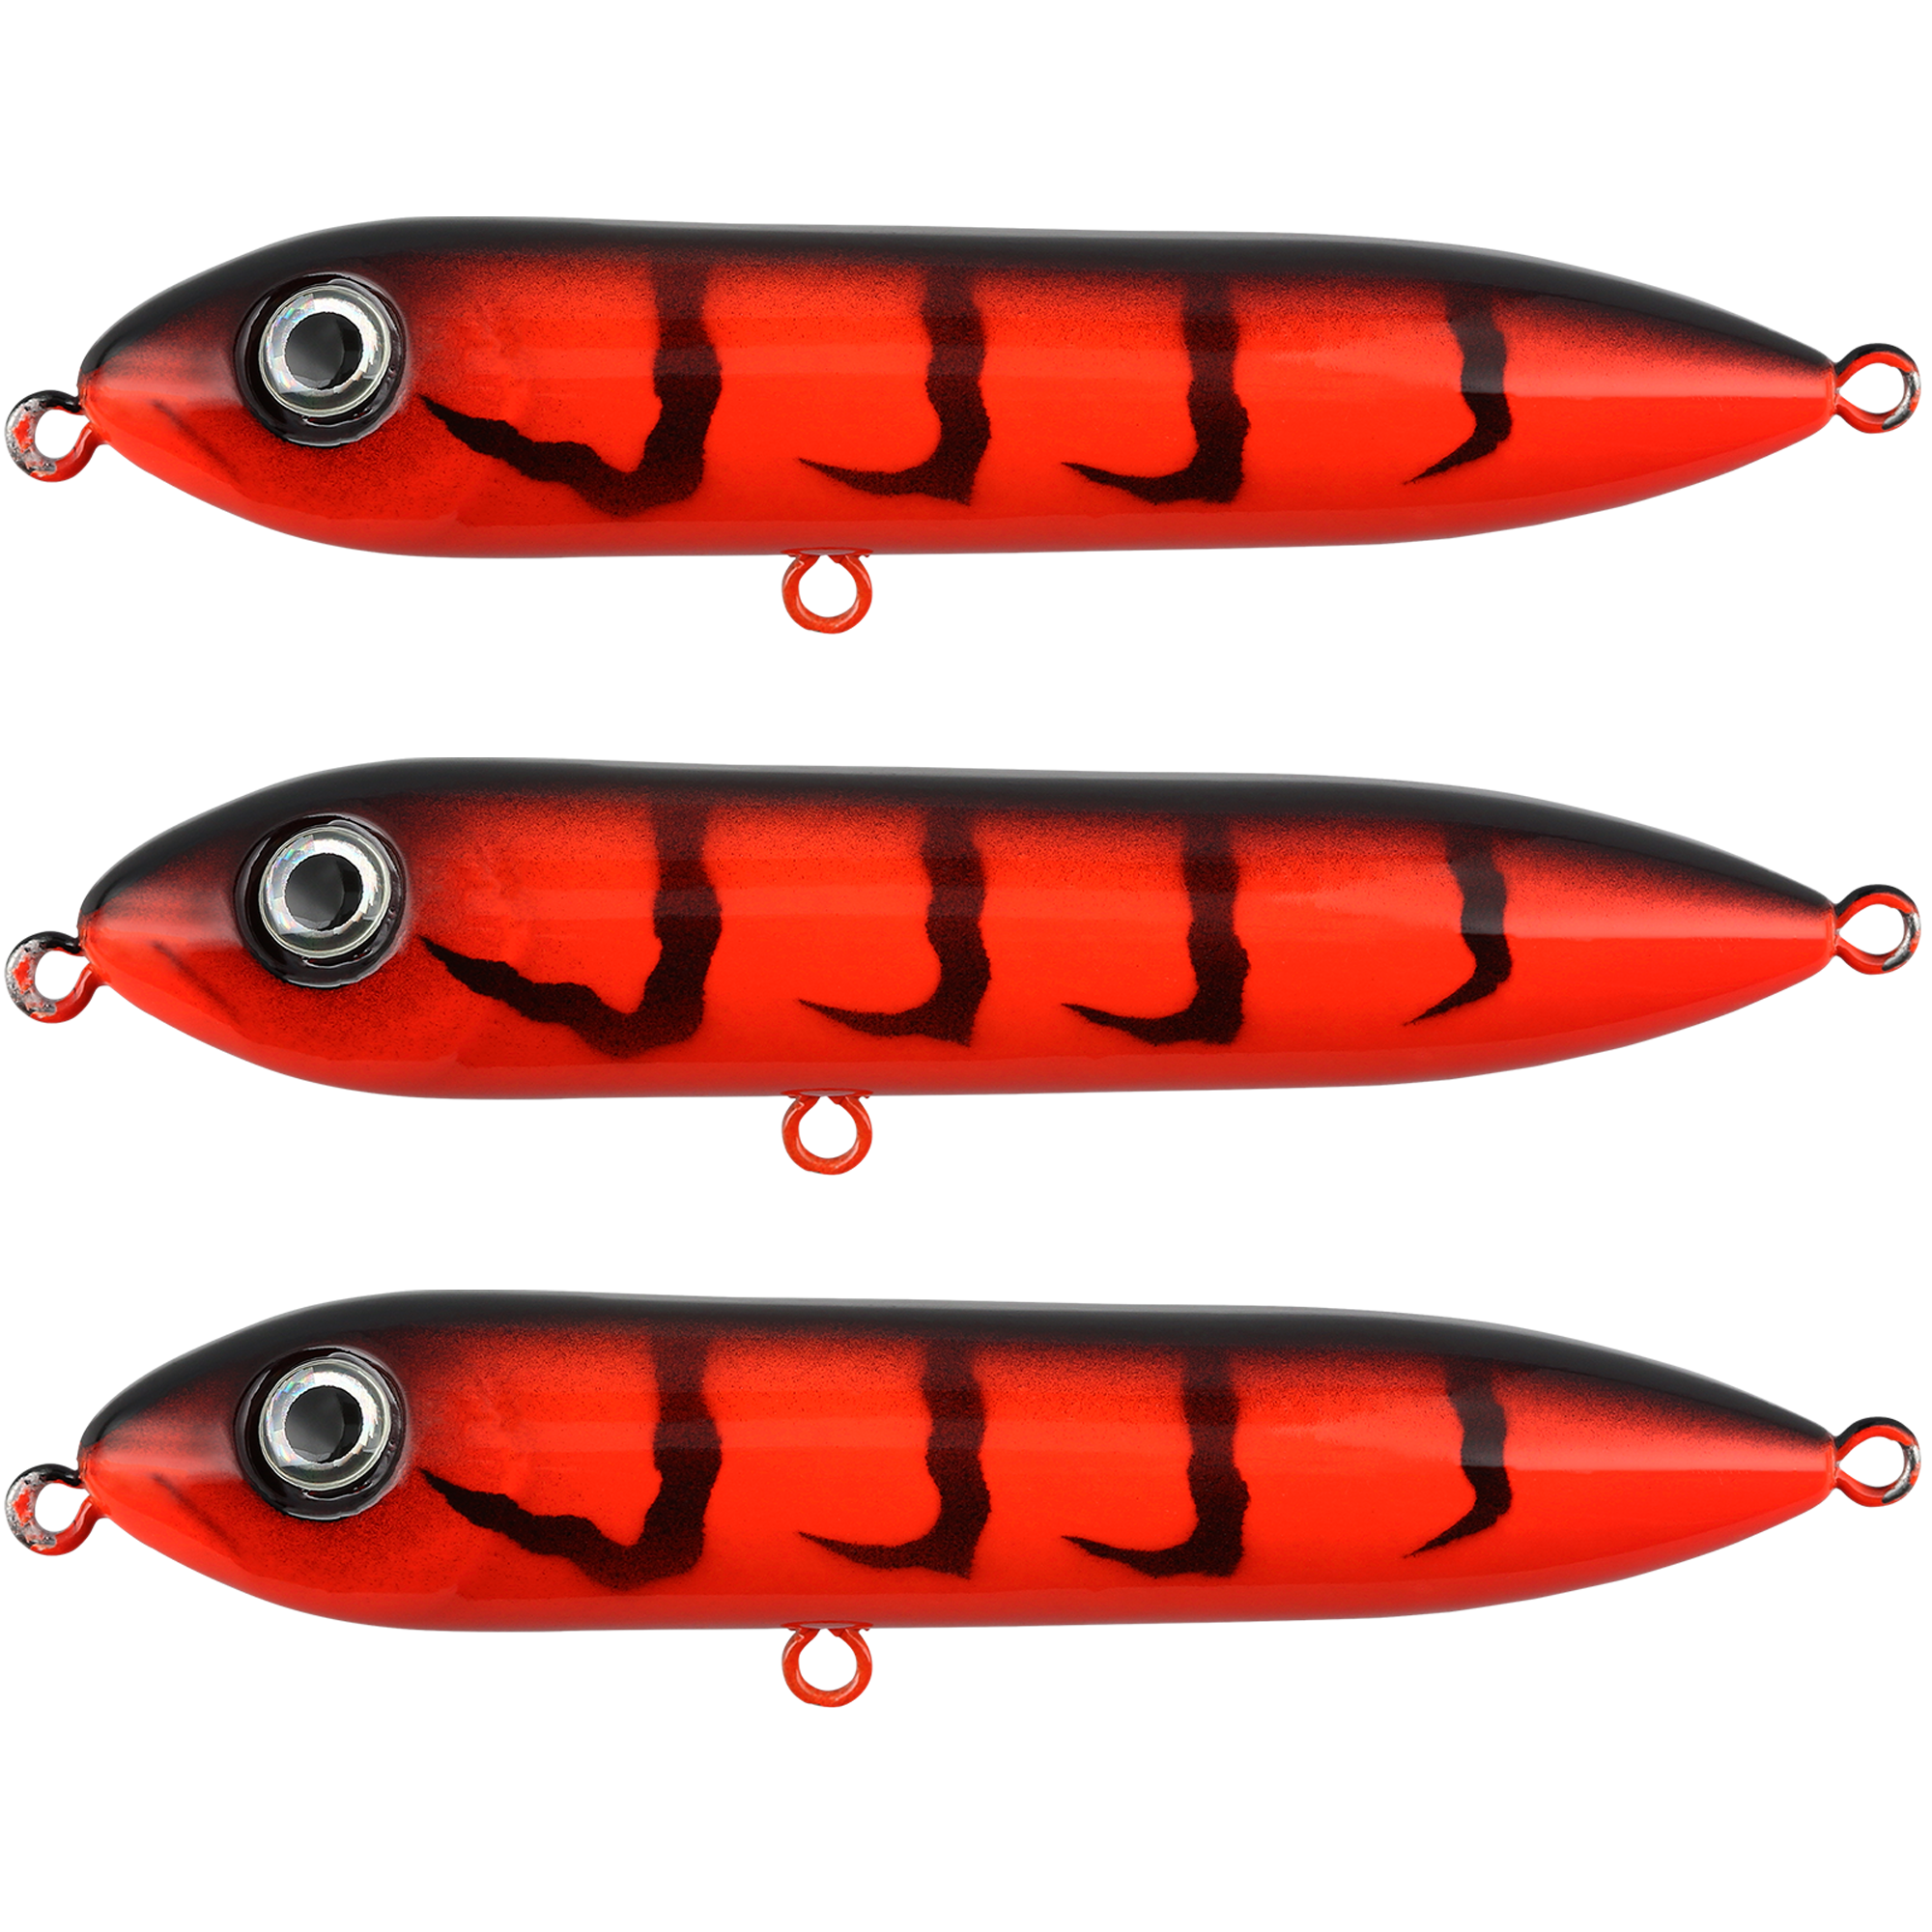 Catfish Rattling Line Float Lure for Catfishing, Demon Dragon Style Peg for Santee Rig Fishing, 4 inch (3 Pack, Demon Tiger)